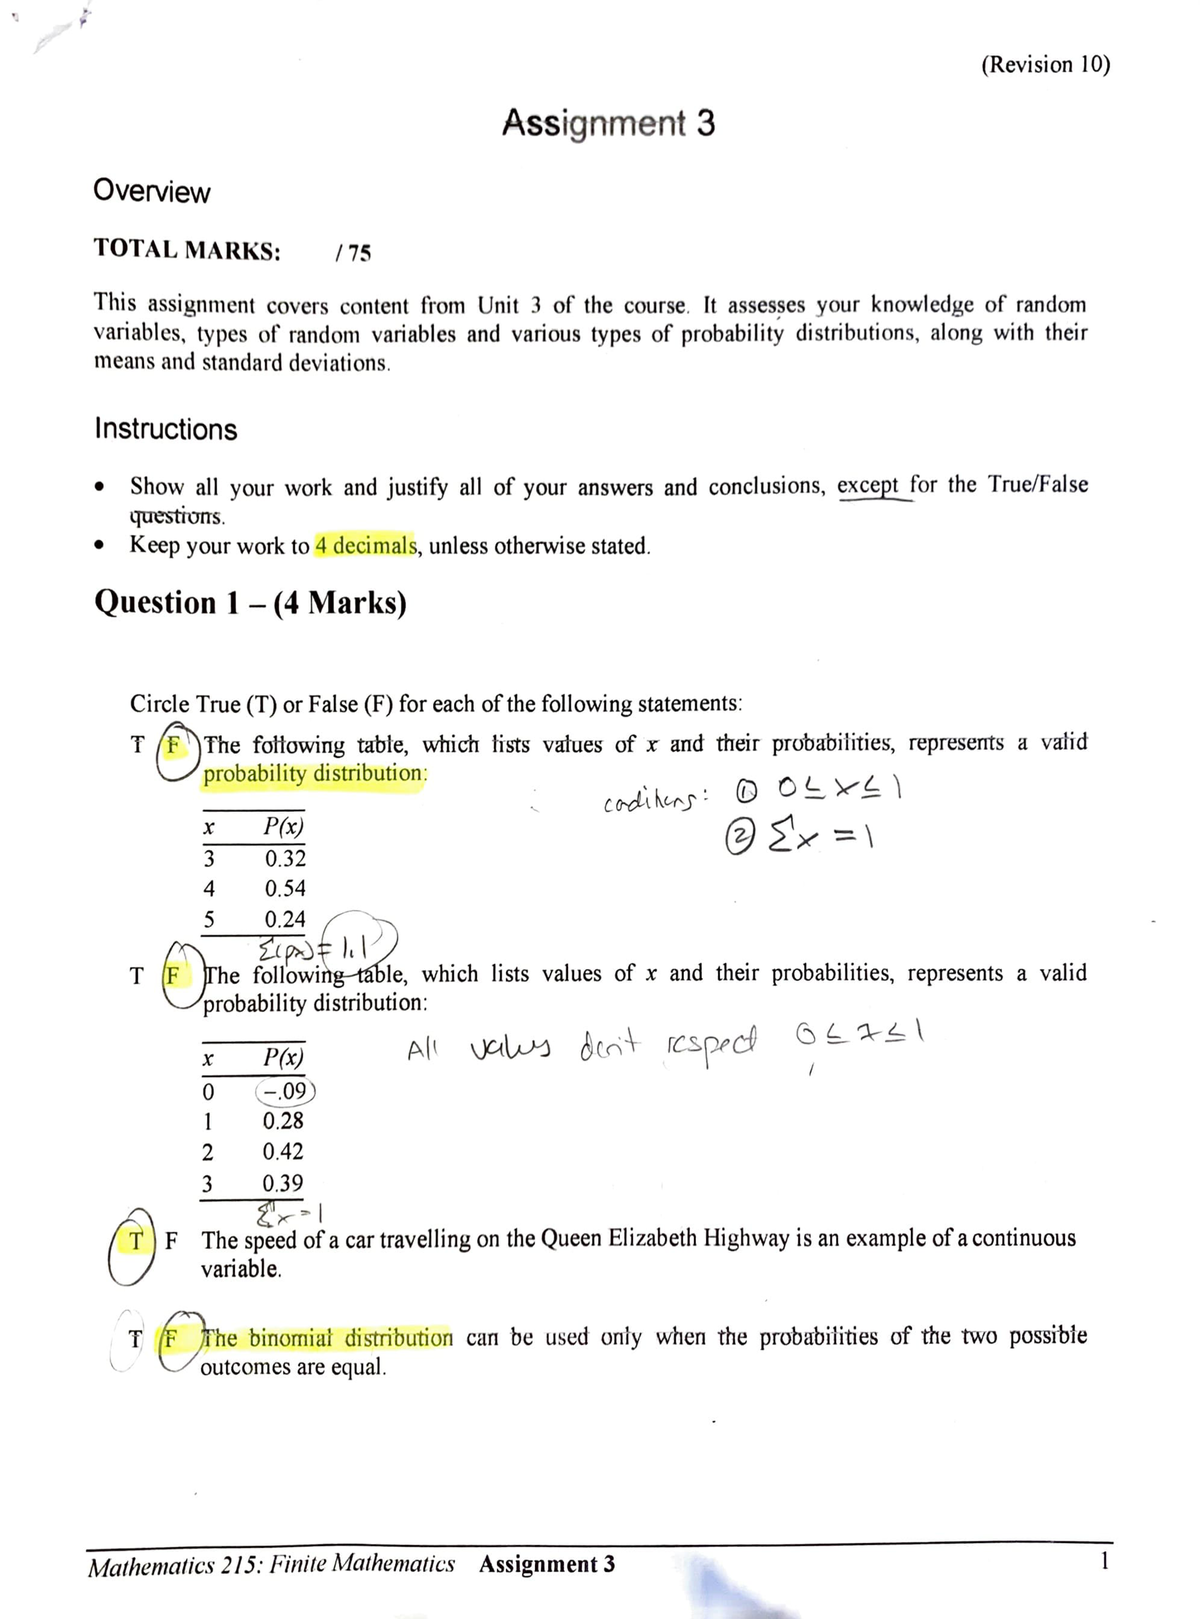 math 215 athabasca assignment 3